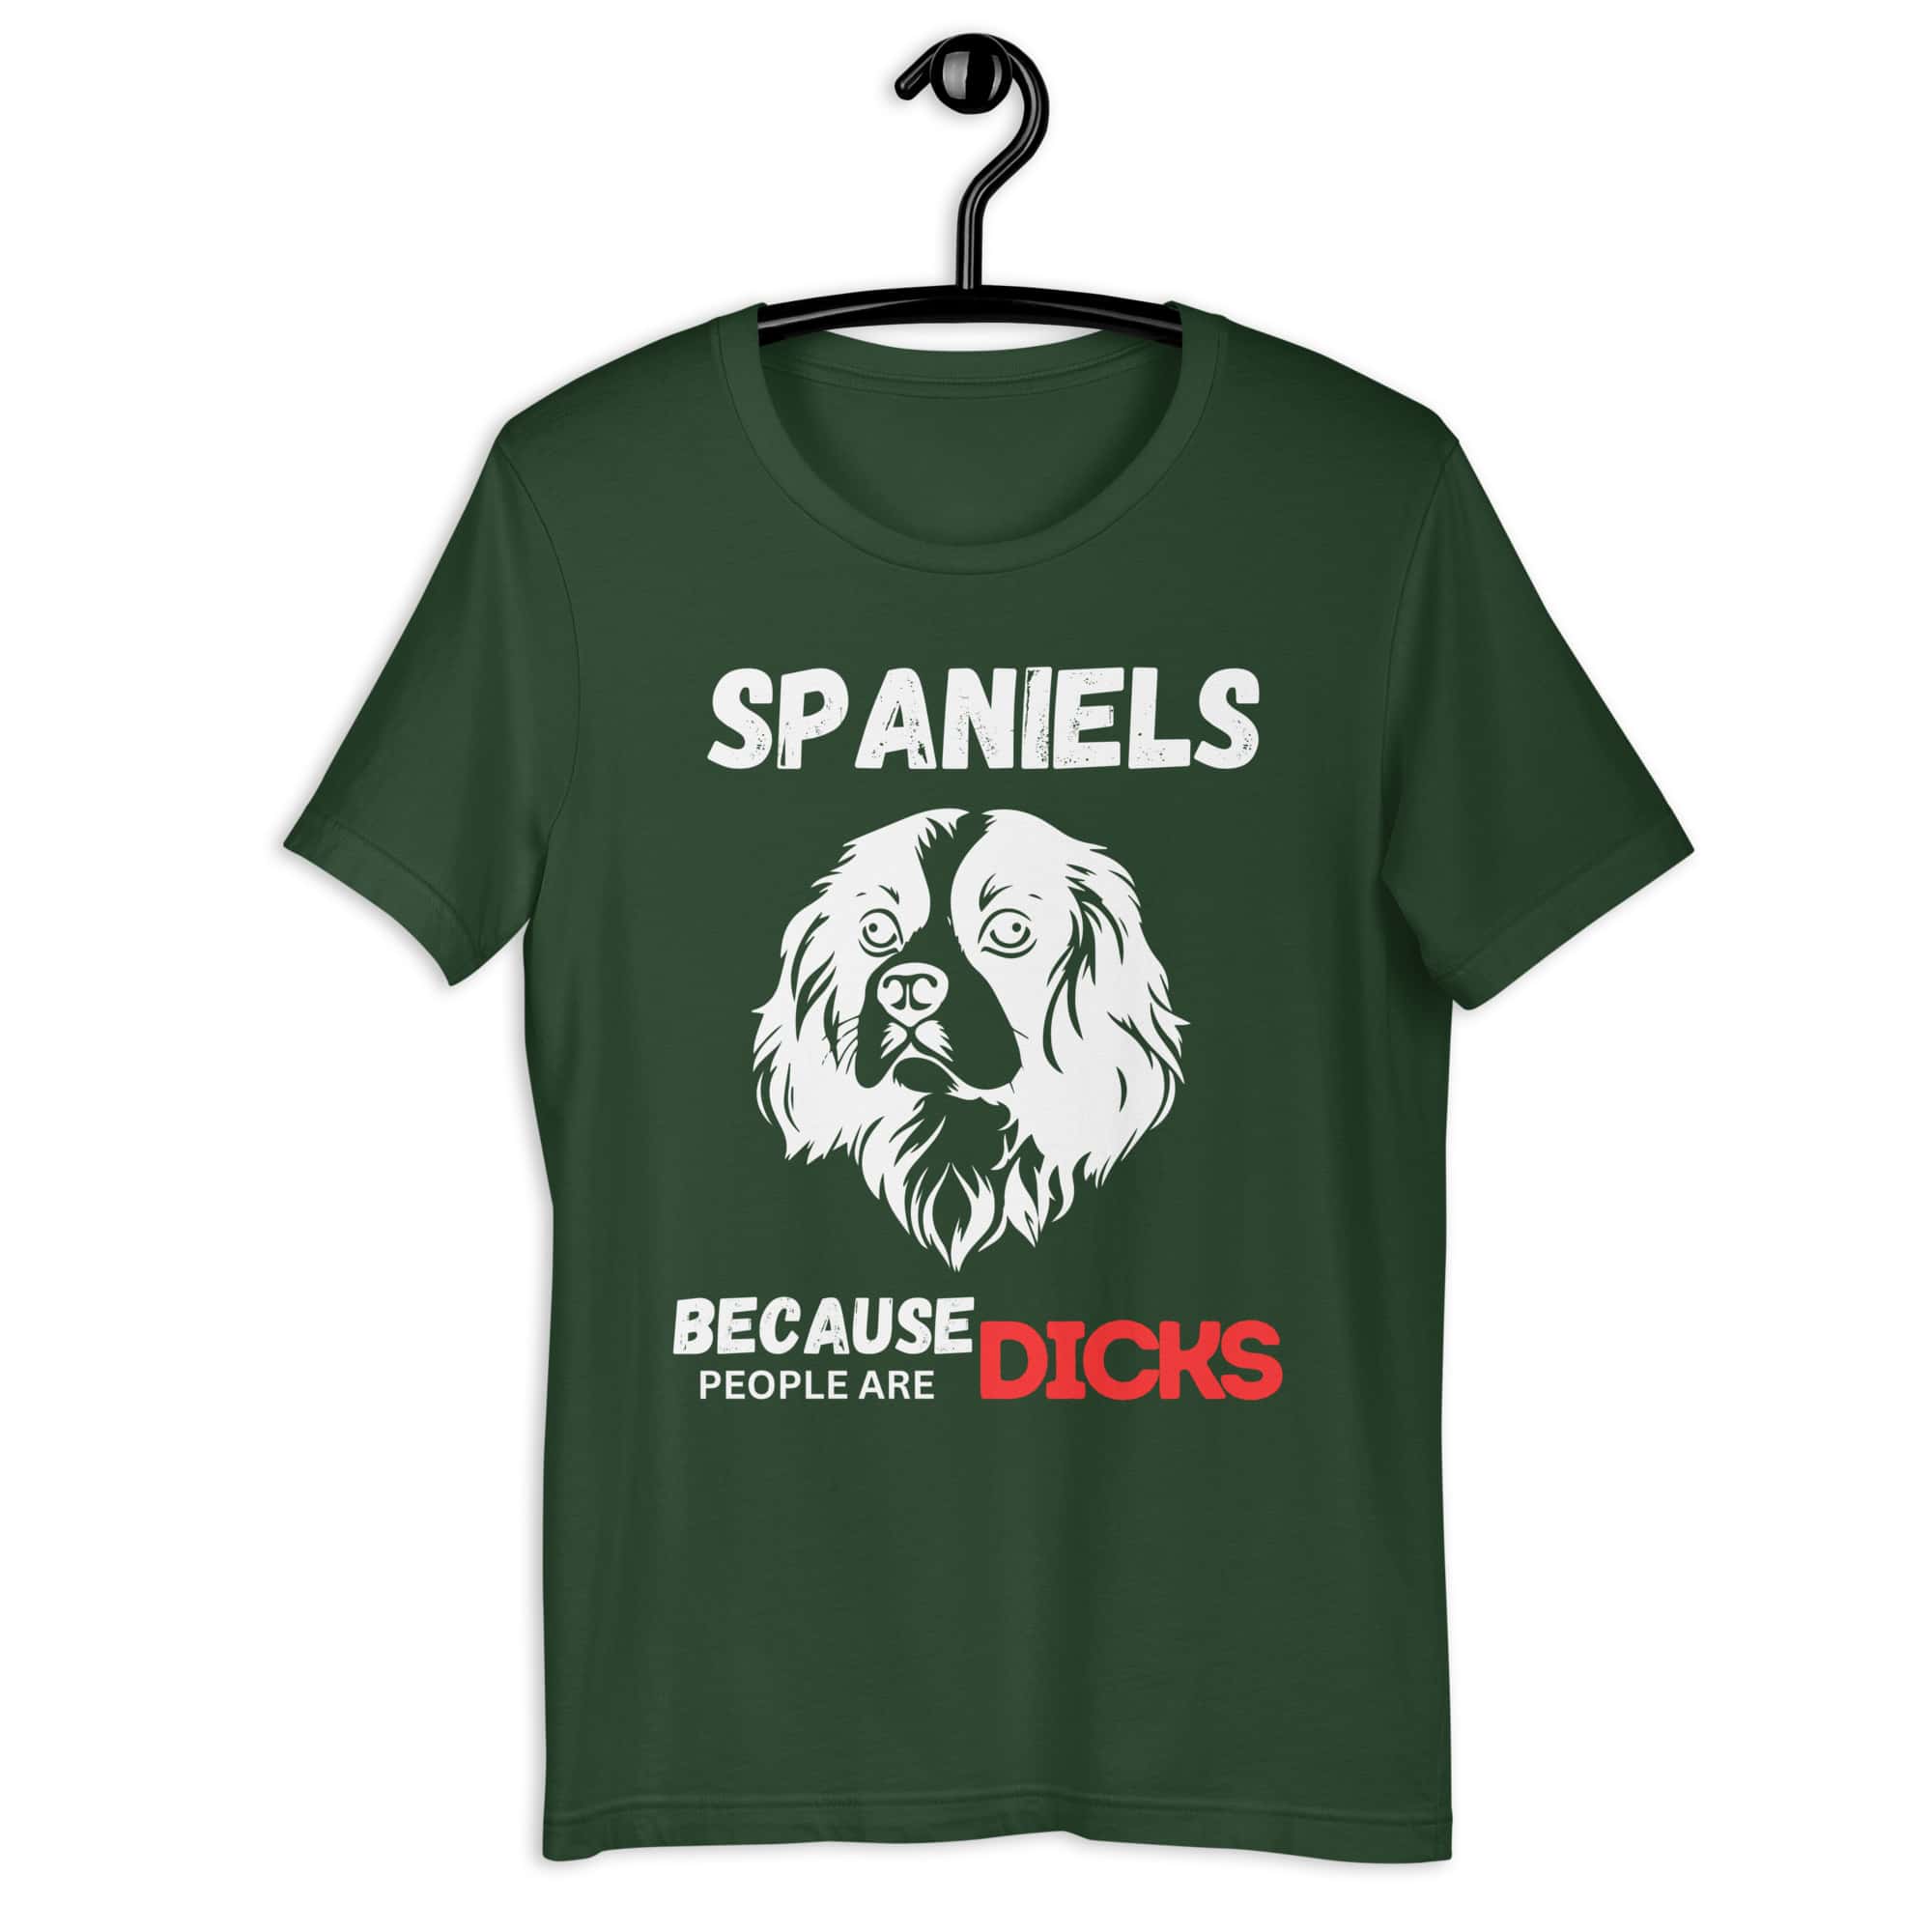 Spaniels Because People Are Dicks Unisex T-Shirt Green